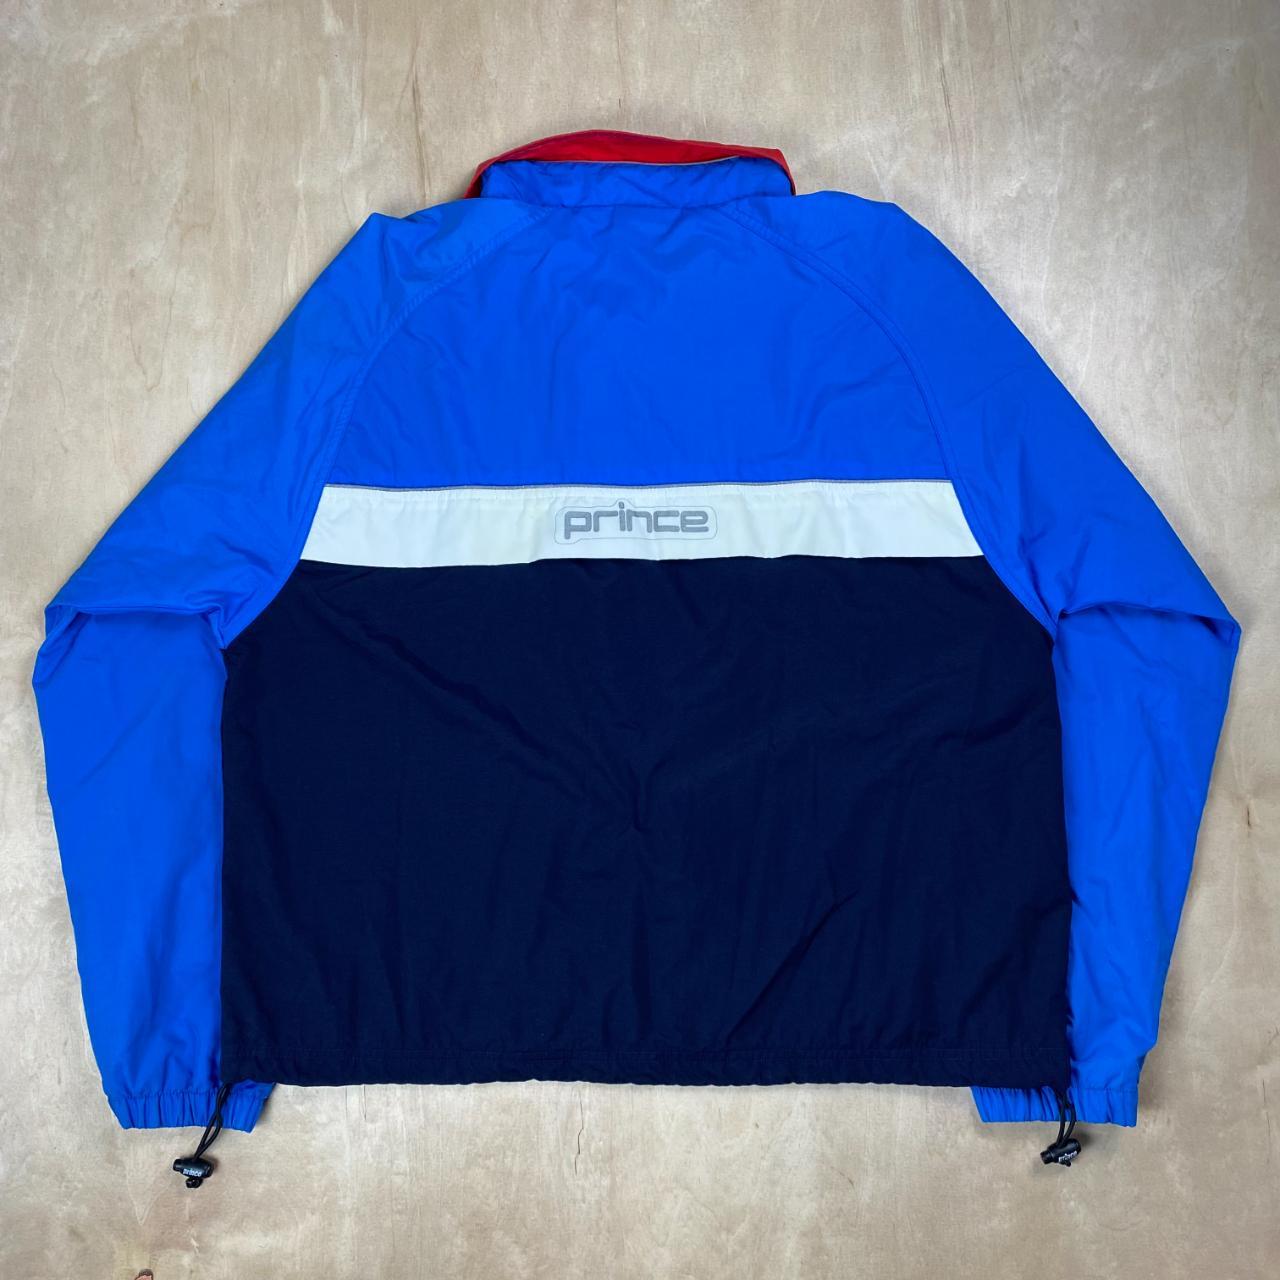 Prince Men's Blue and Red Jacket (4)